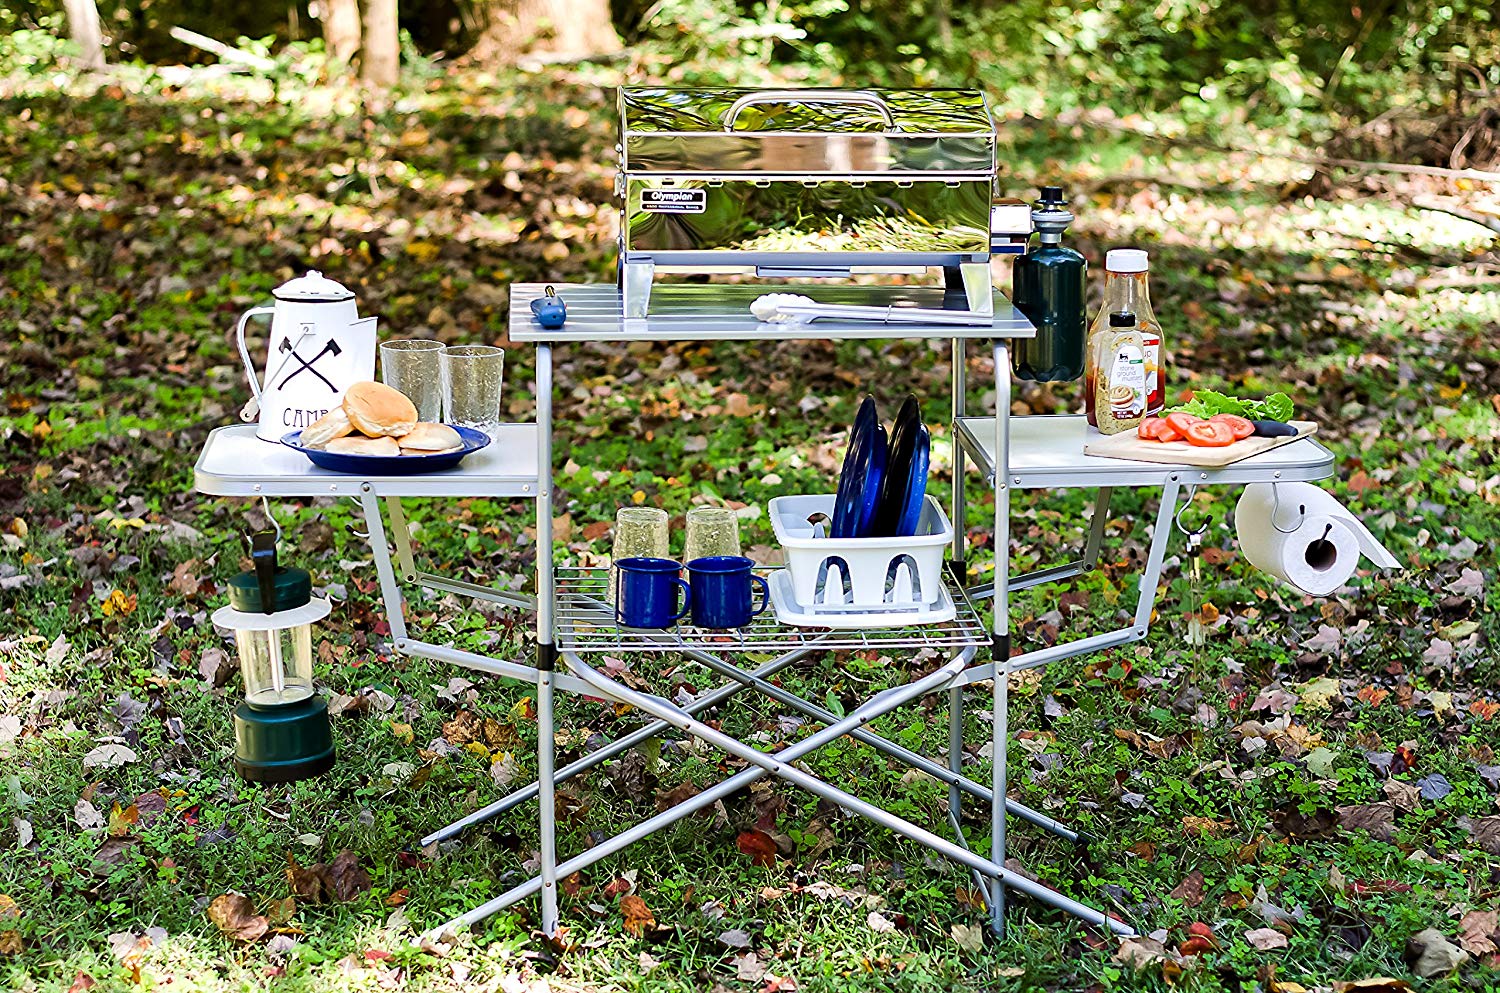 best camping accessories, best camping gear, cool camping gear, cool camping gadget, camping tools, cool camping stuff,  must have camping gadgets, new camping gear, cool outdoor gear, best camping equipment, top camping gear.